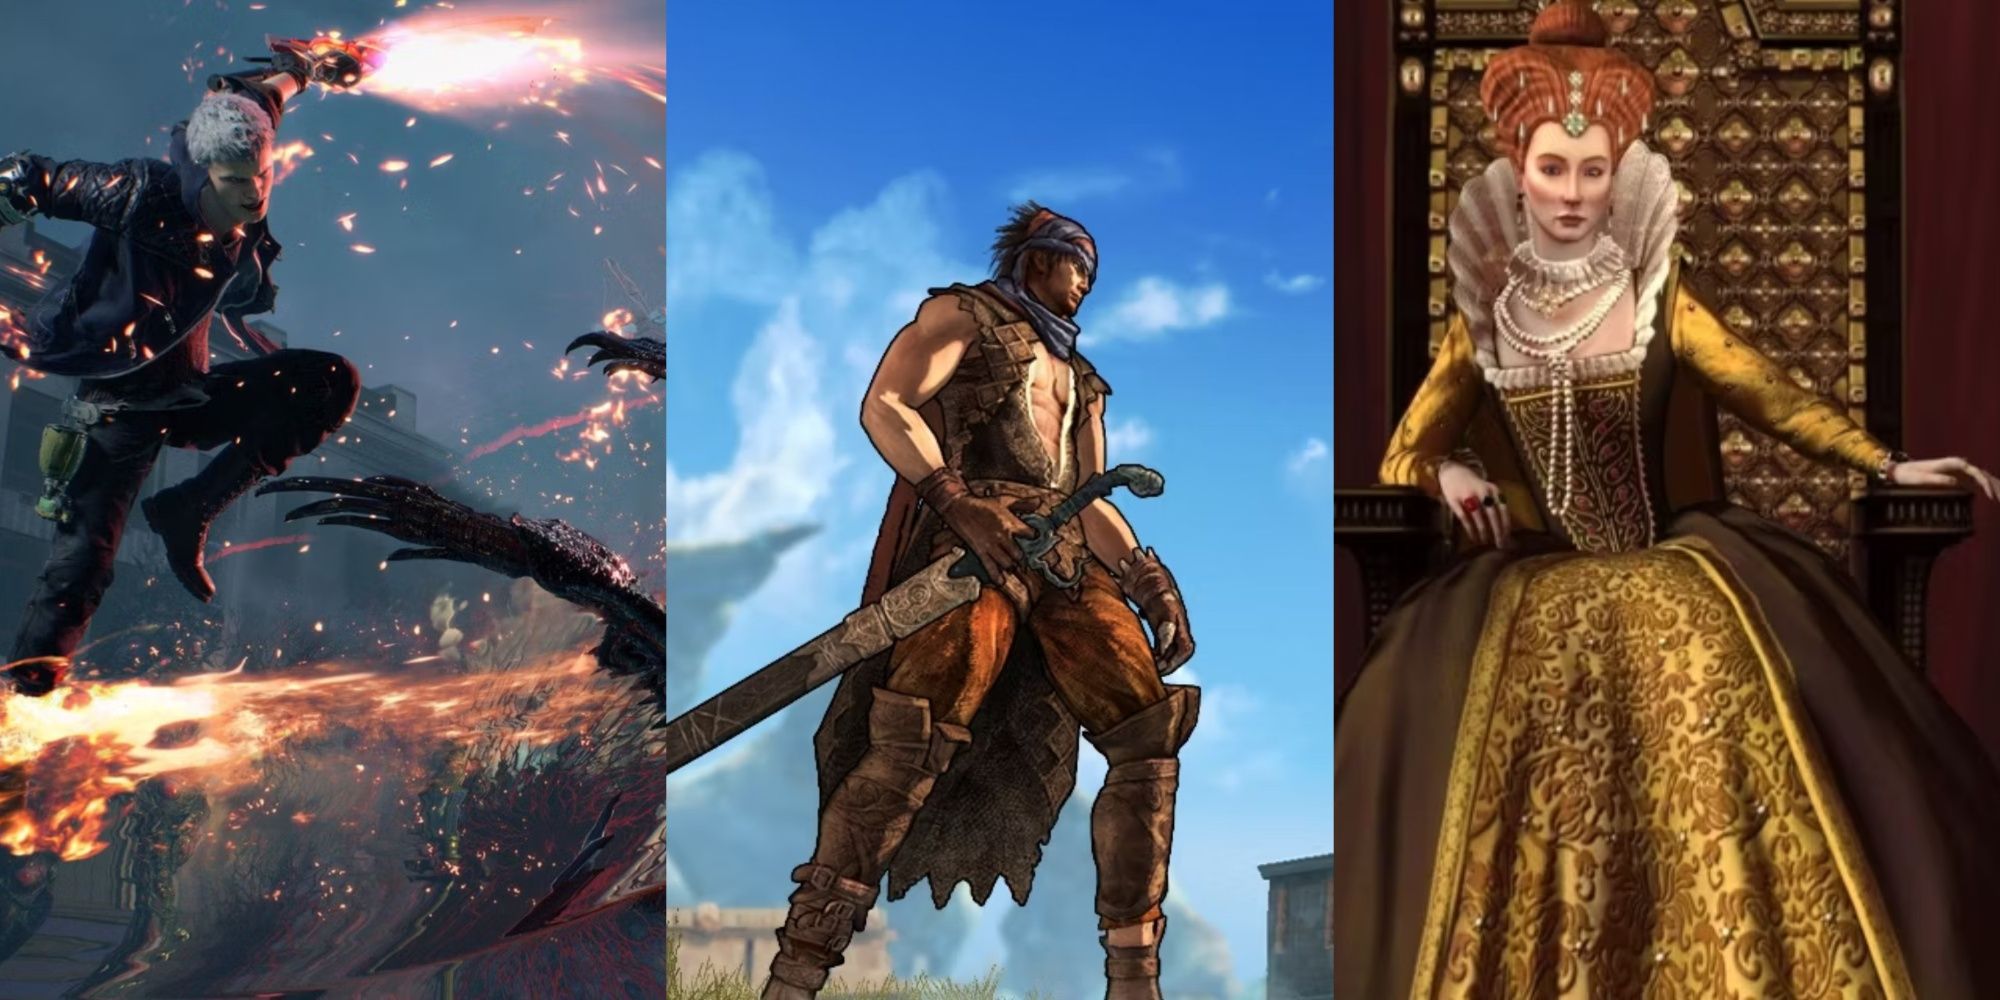 Devil May Cry 5 Nero attacking with his arm, the Prince from Prince of Persia 2008 against a deep blue sky, and Queen Elizabeth from Civilization 5, left to right